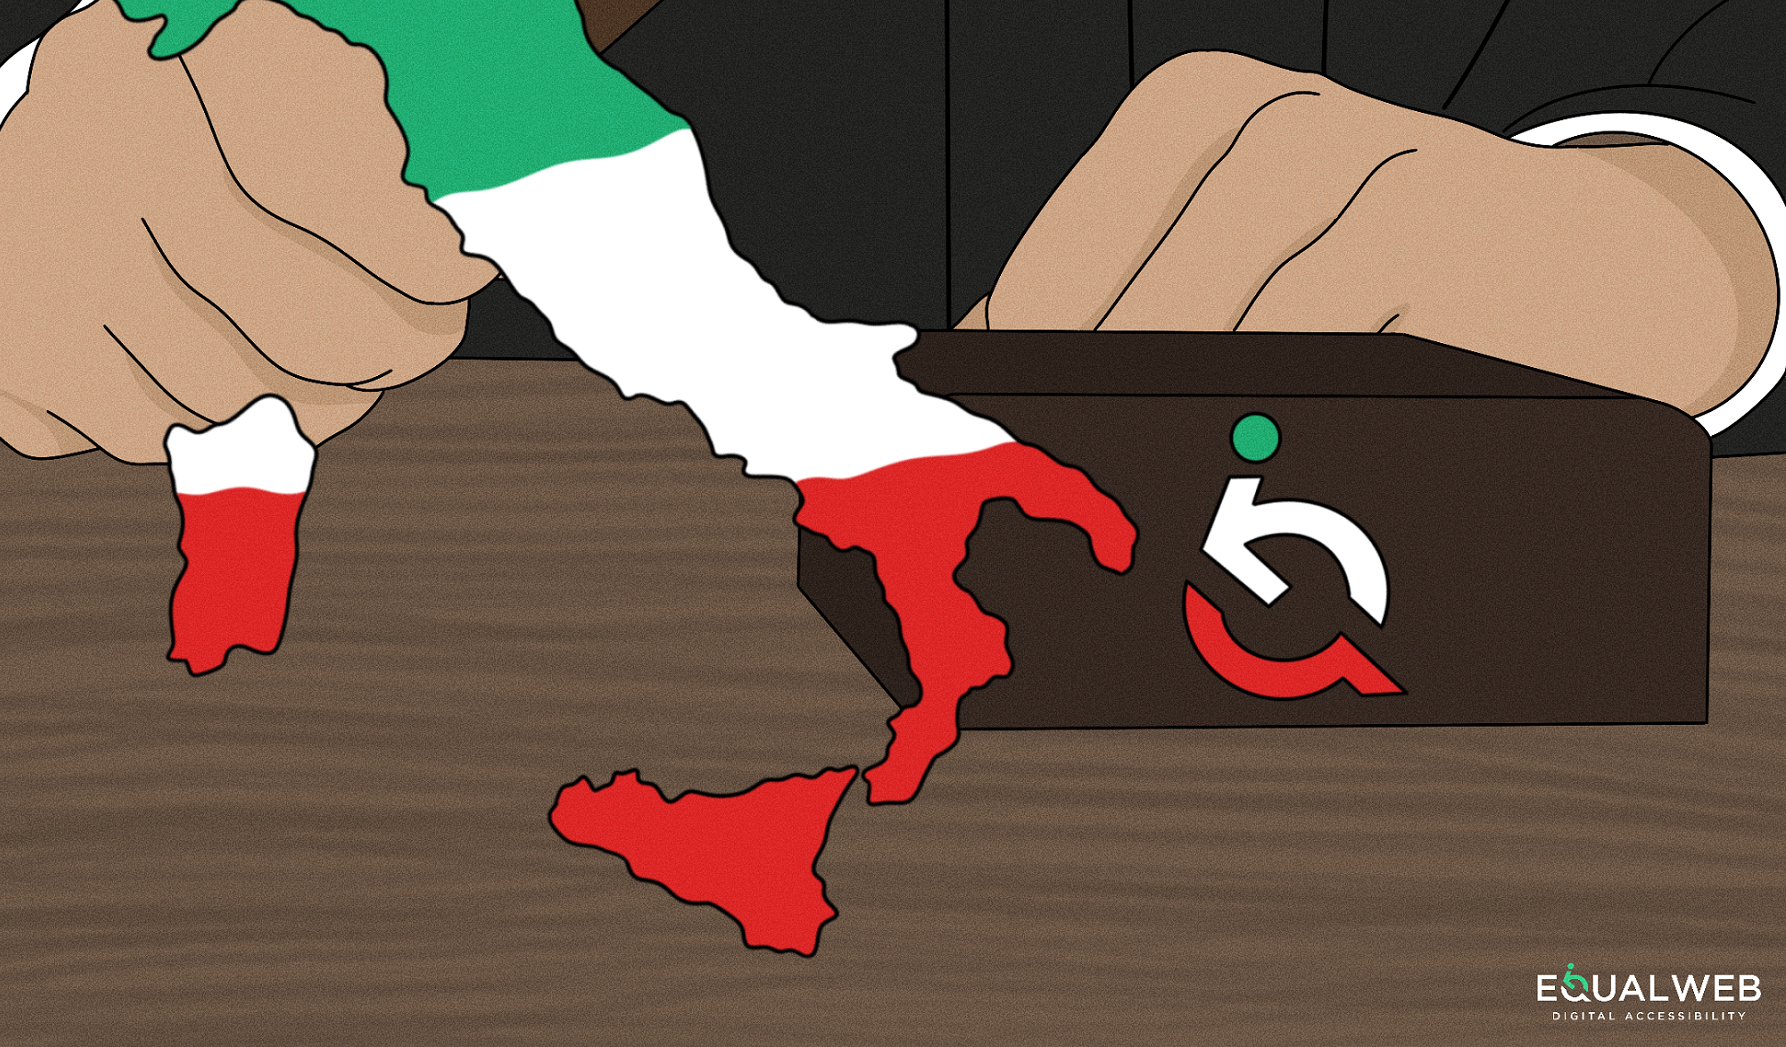 Judge holding map of Italy in Italian flag colors